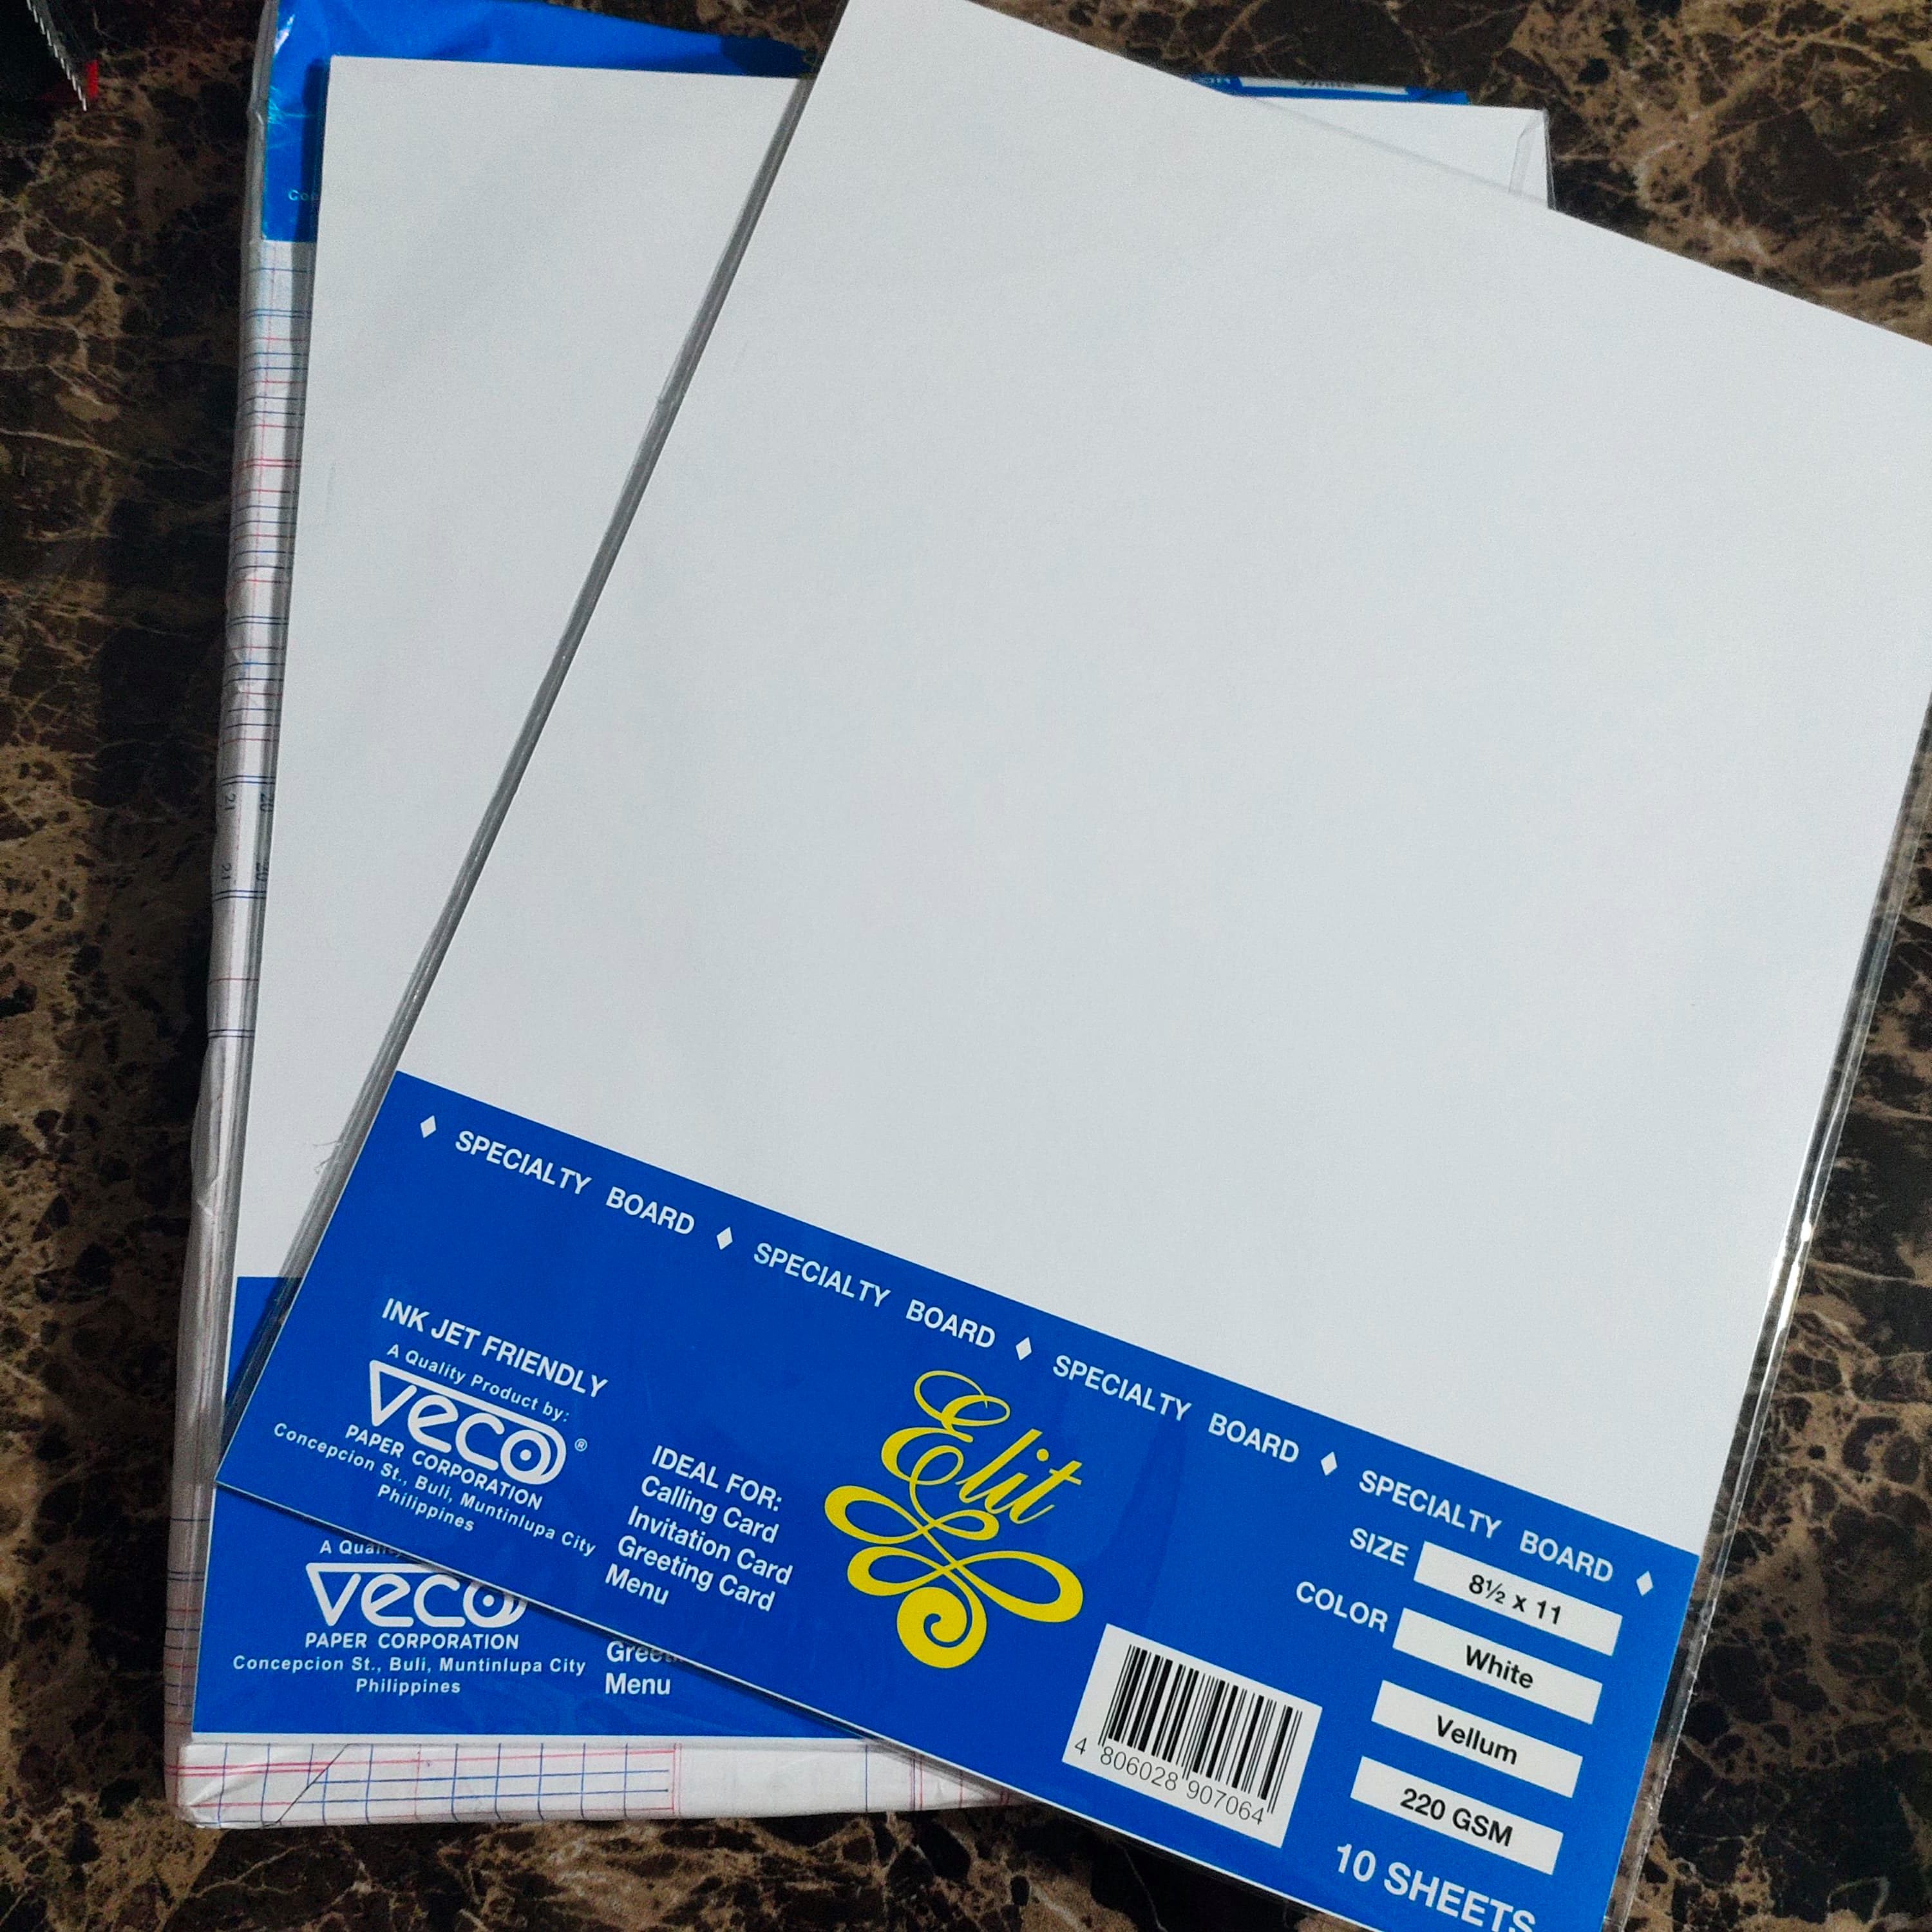 veco-vellum-board-specialty-board-by-2s-by-10-sheets-short-a4